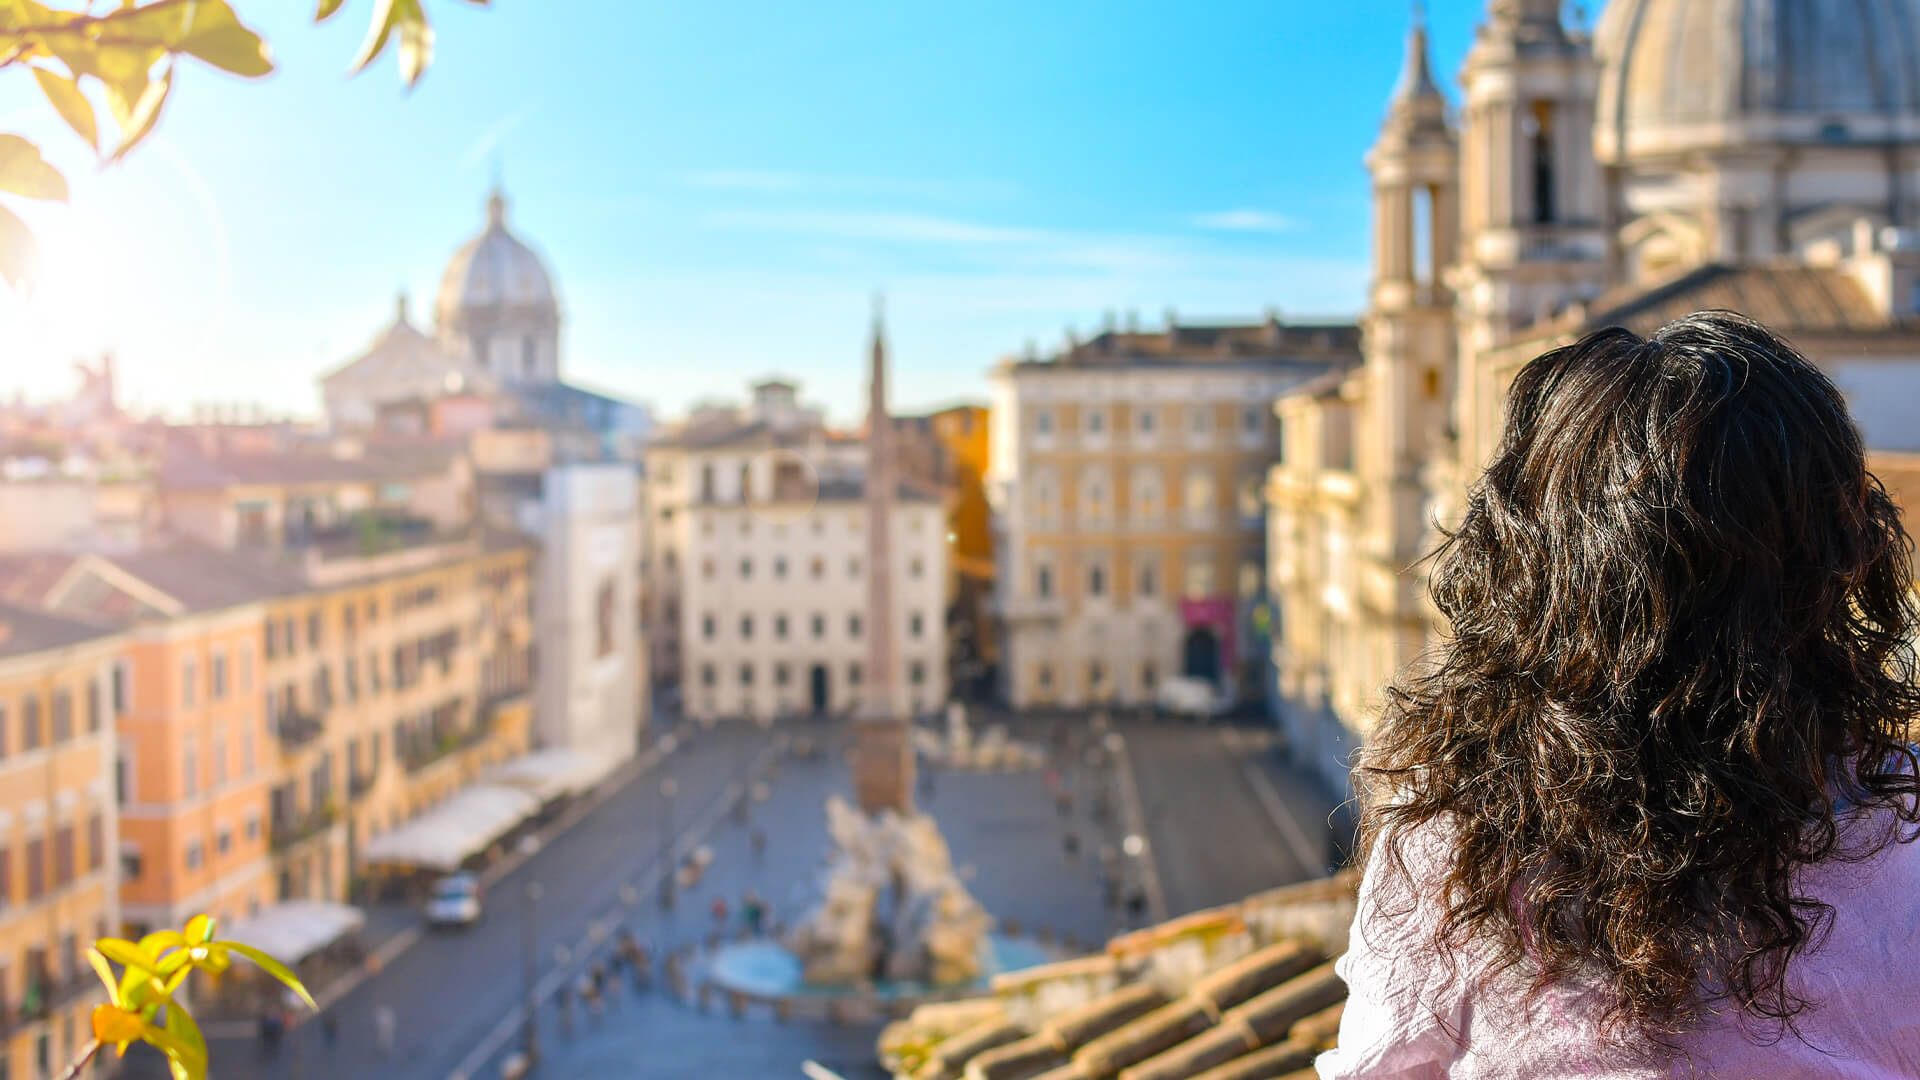 Woman standing on a rooftop overlooking the Piazza Navona in Rome, Italy